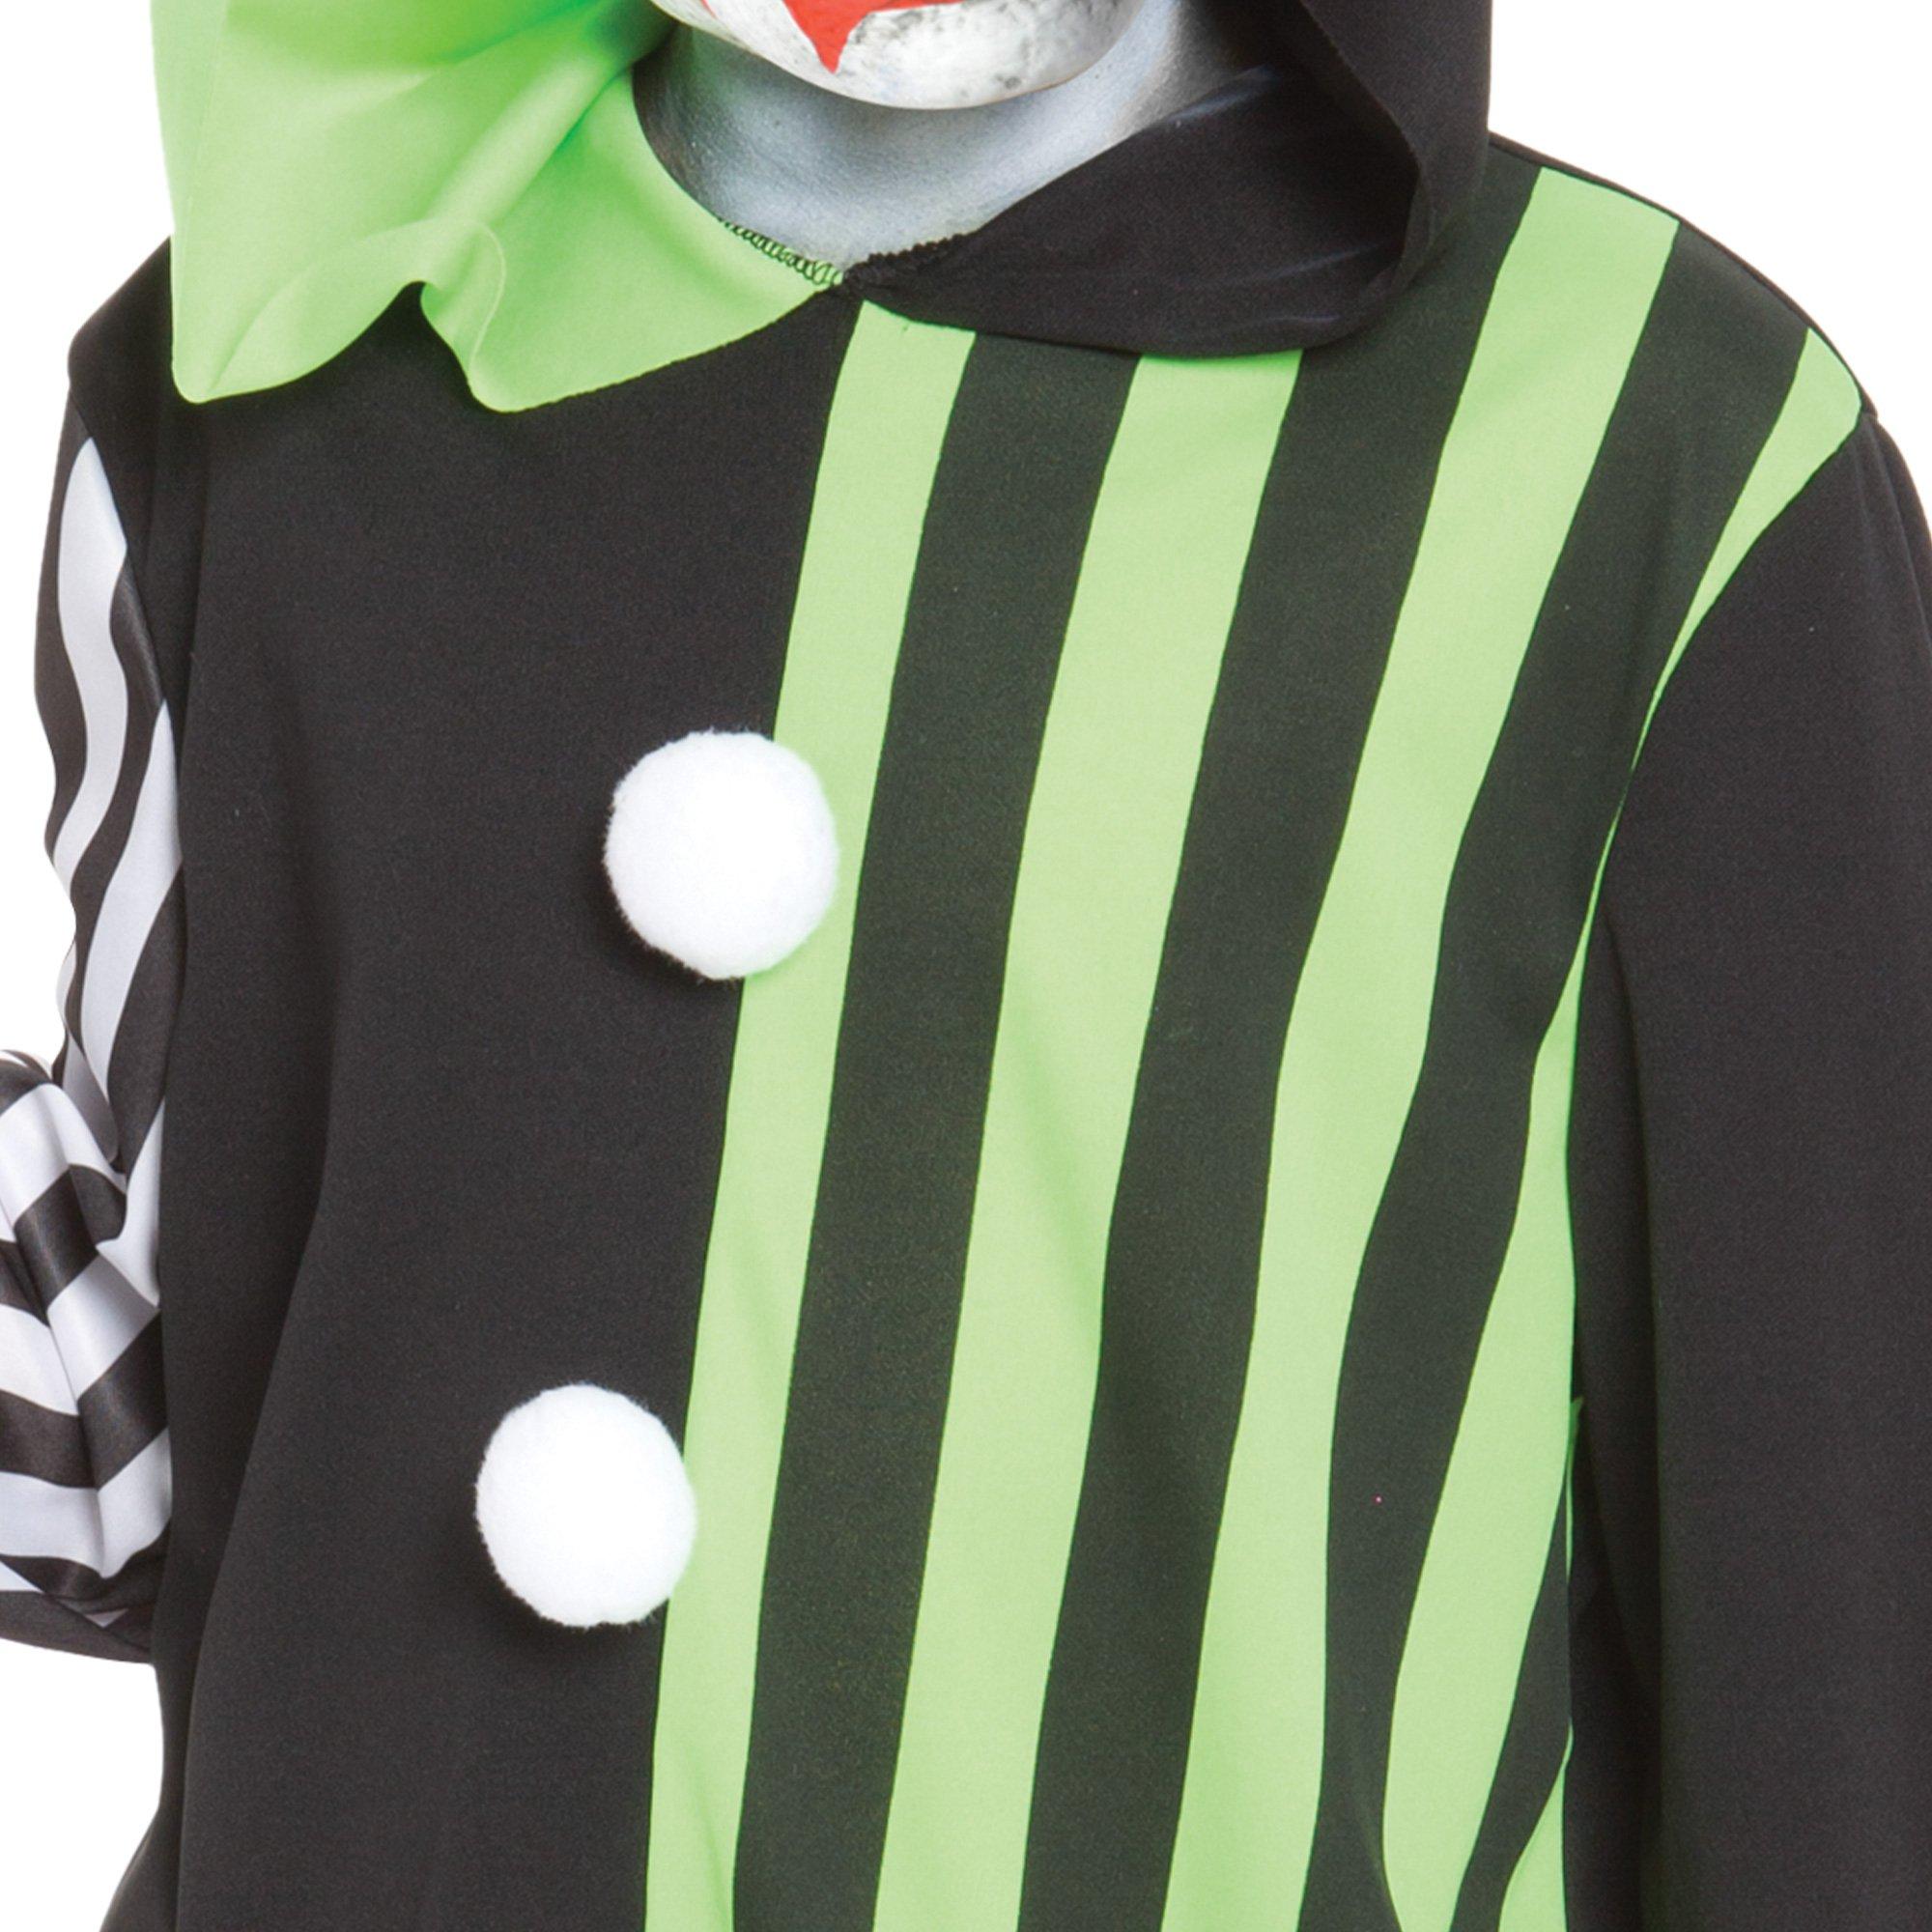 Light-Up Electric Terror Clown Costume for Kids